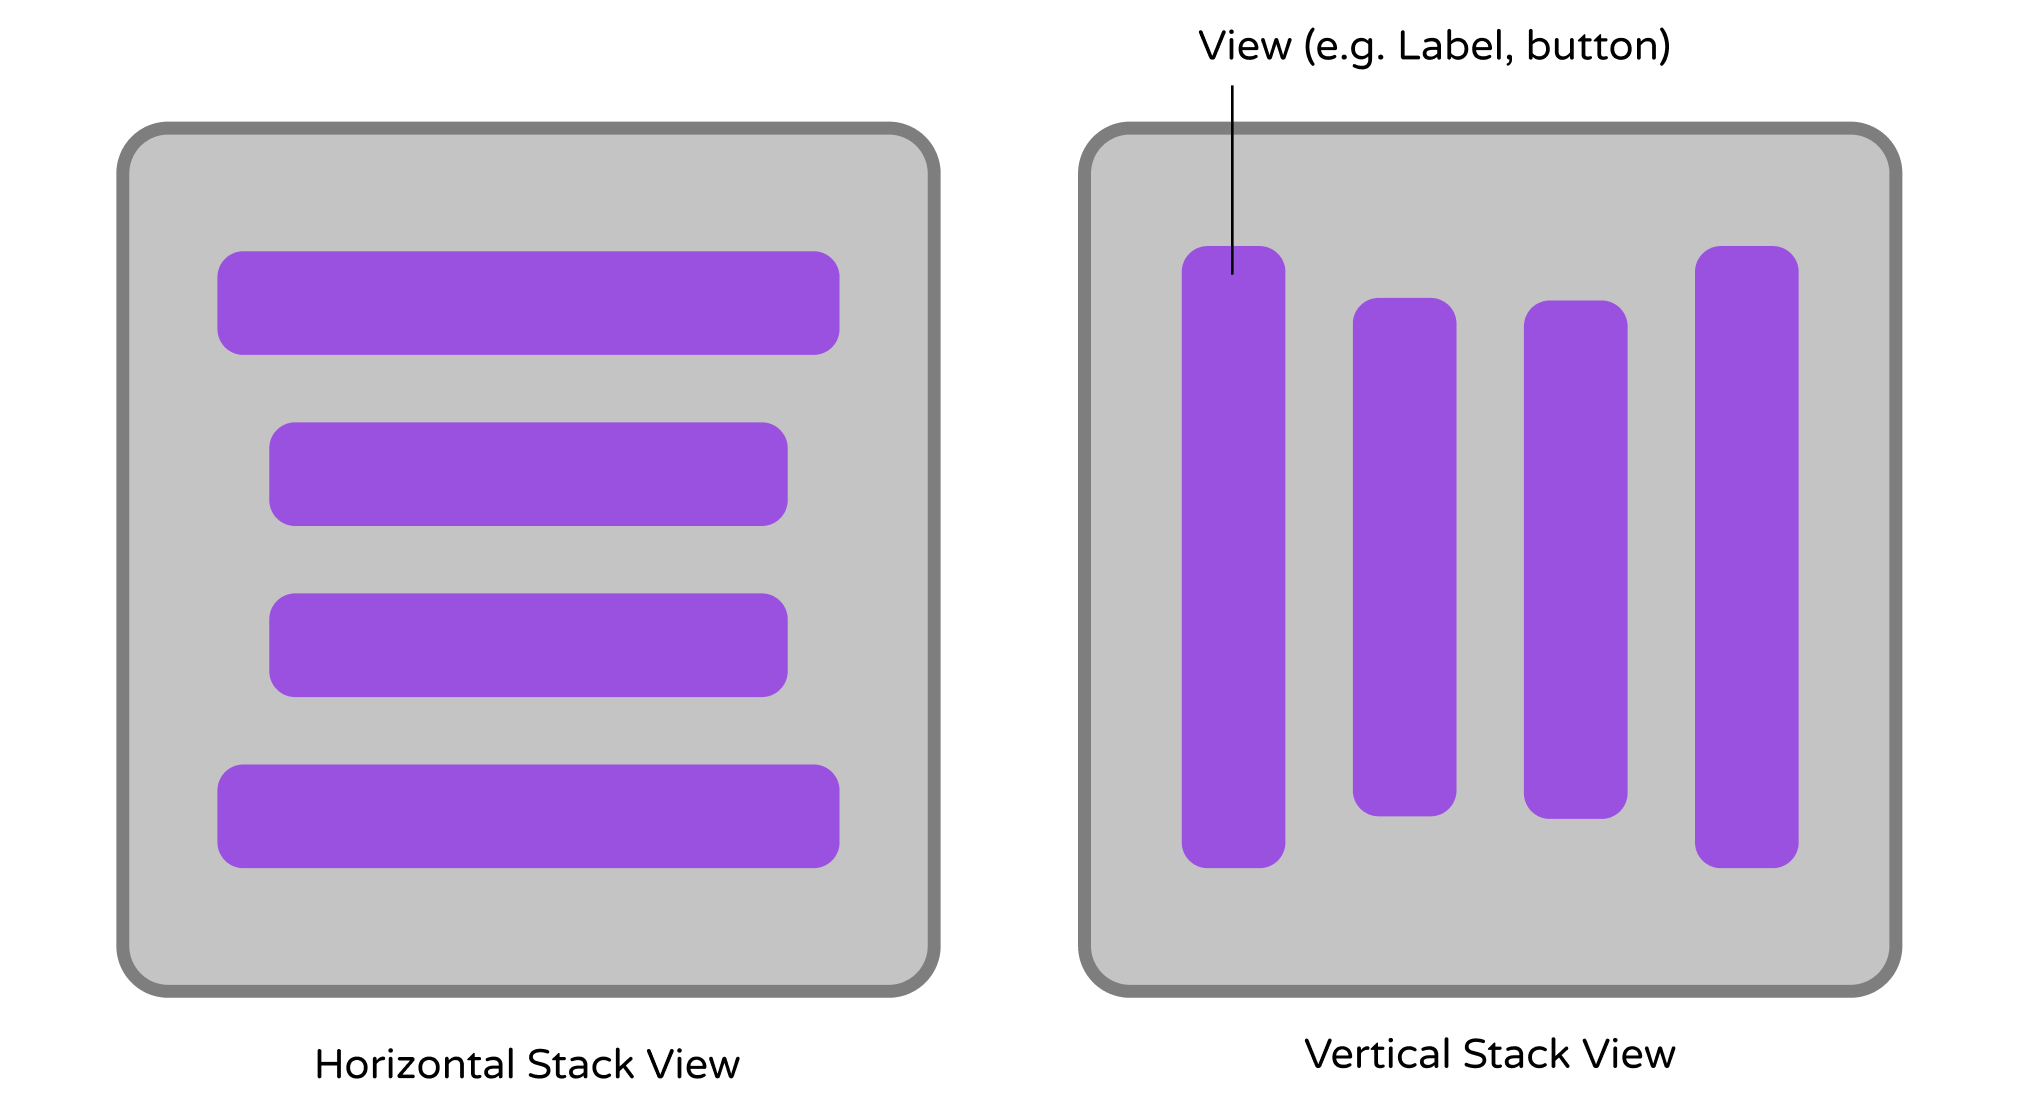 Figure 6-1. Horizontal Stack View (left) / Vertical Stack View (right)